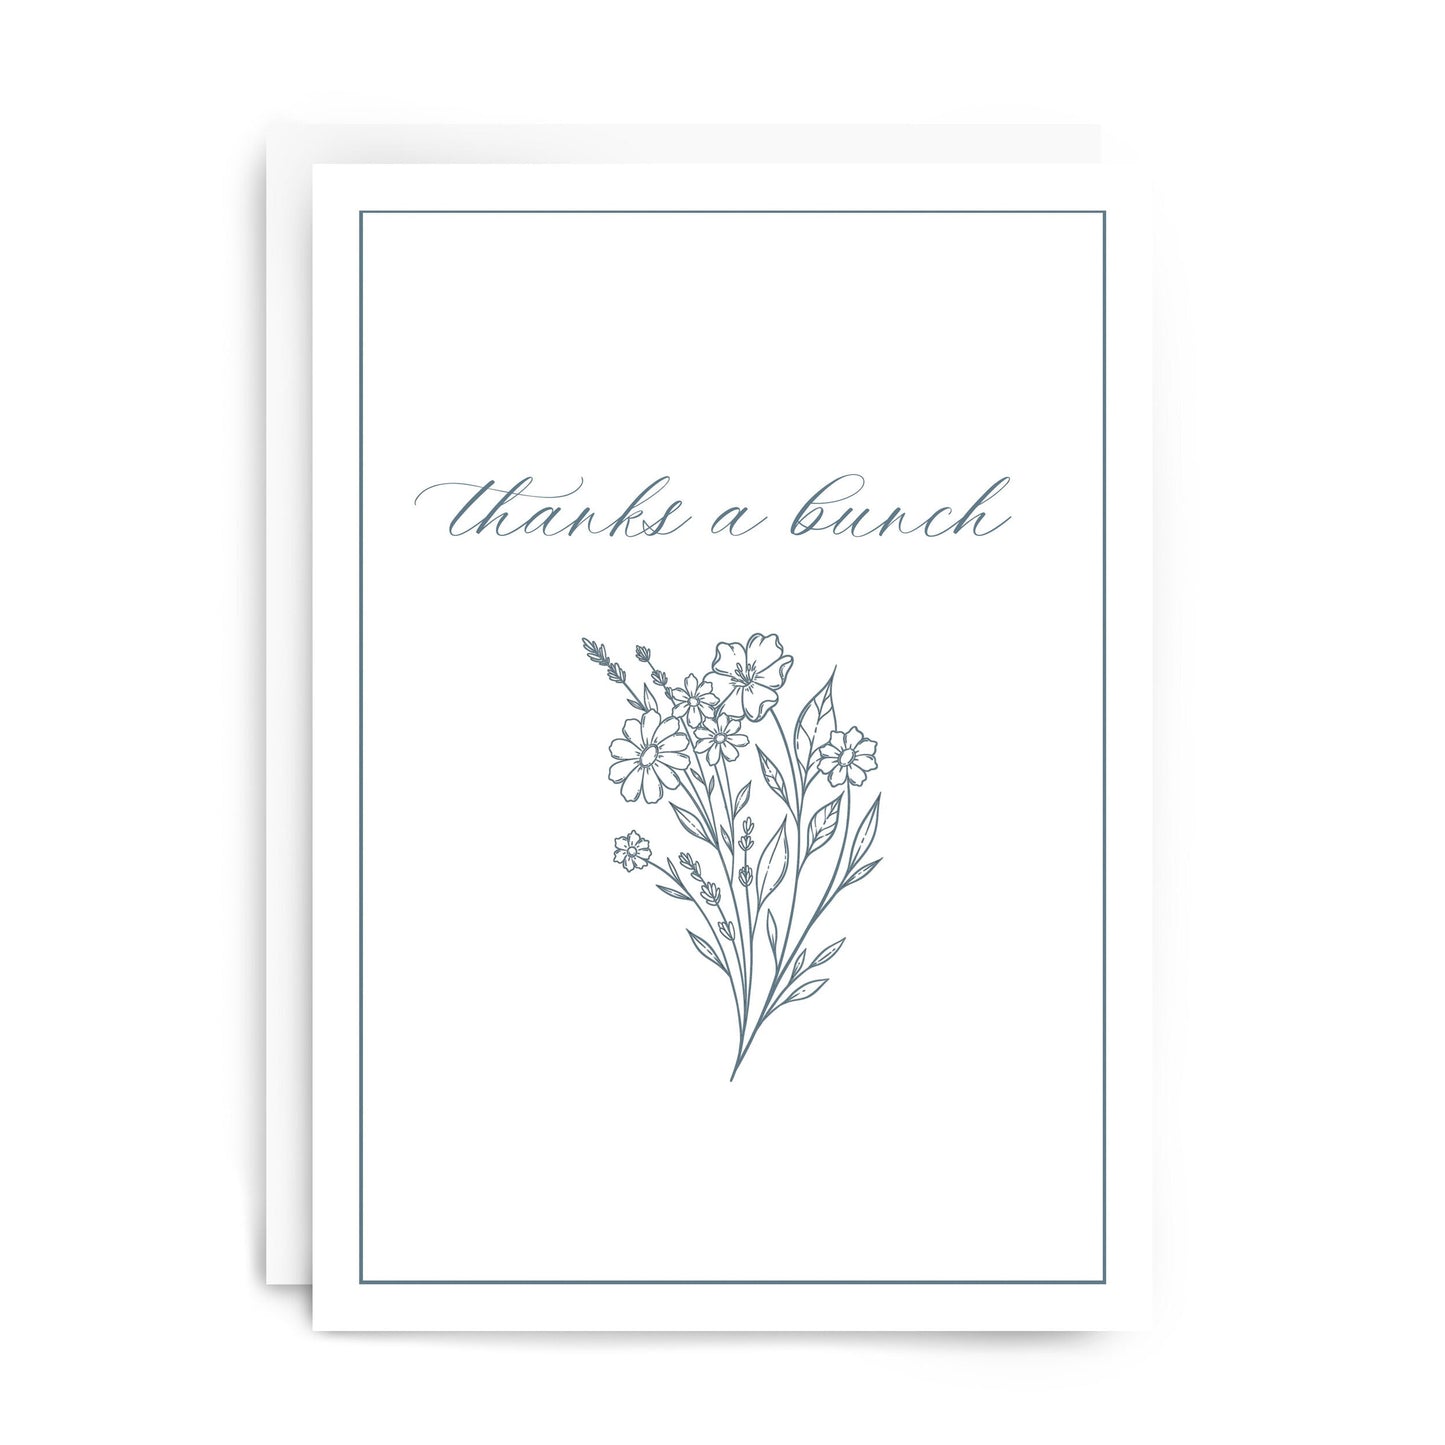 "Thanks A Bunch" Greeting Card